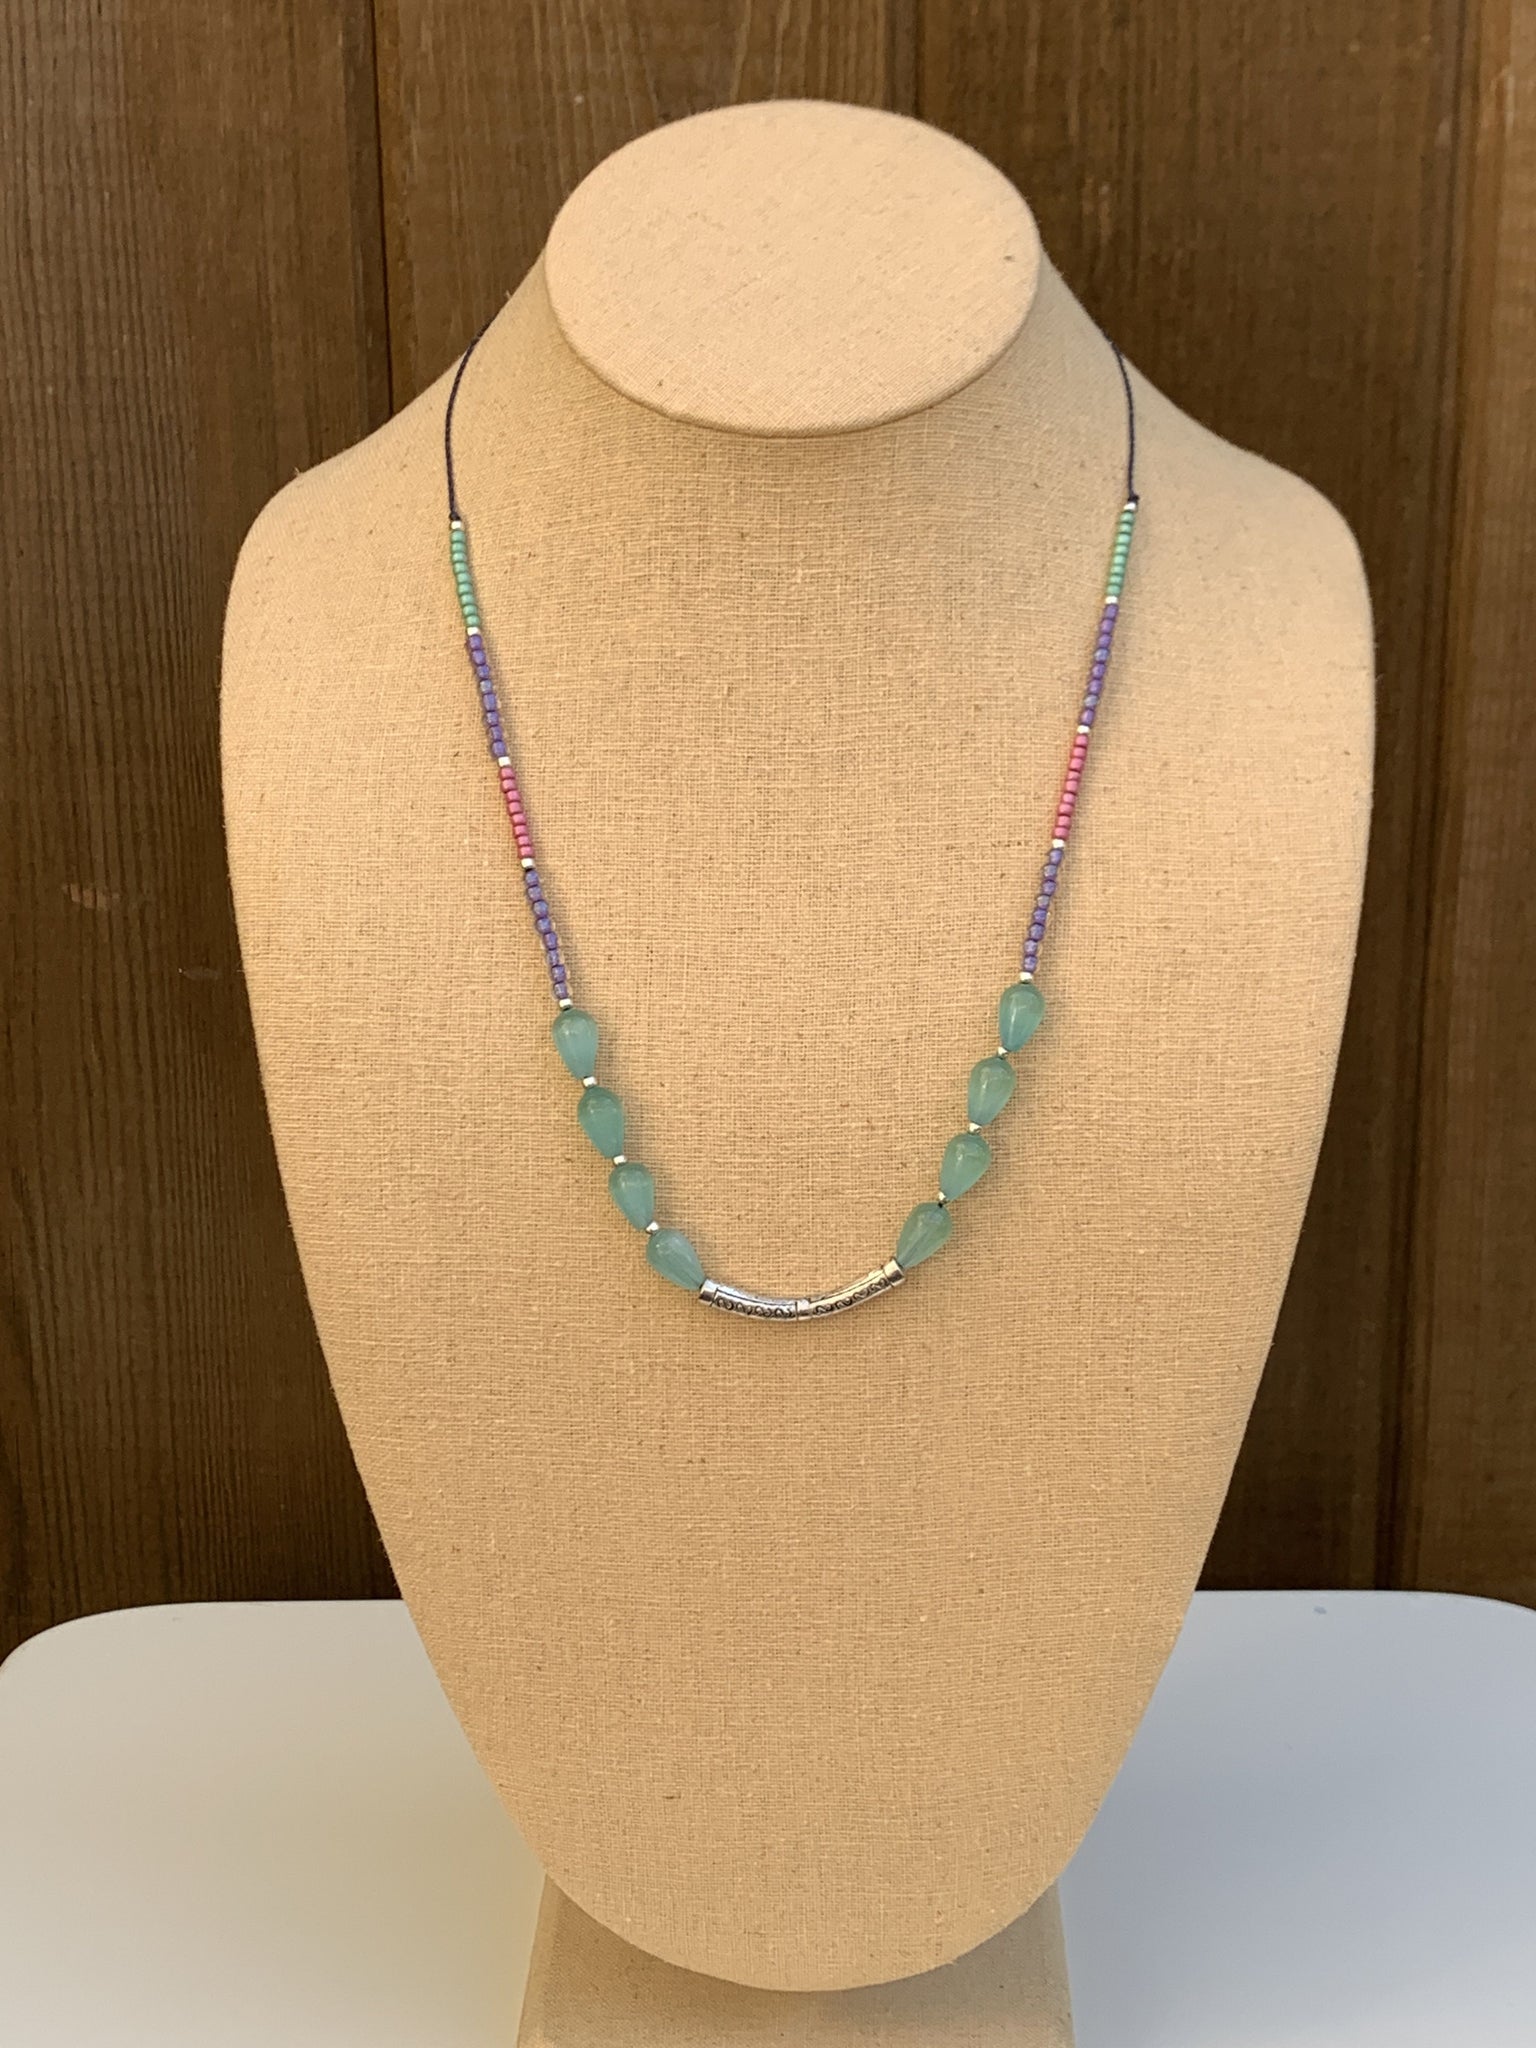 Waxed cord necklace - Turquoise Teardrop